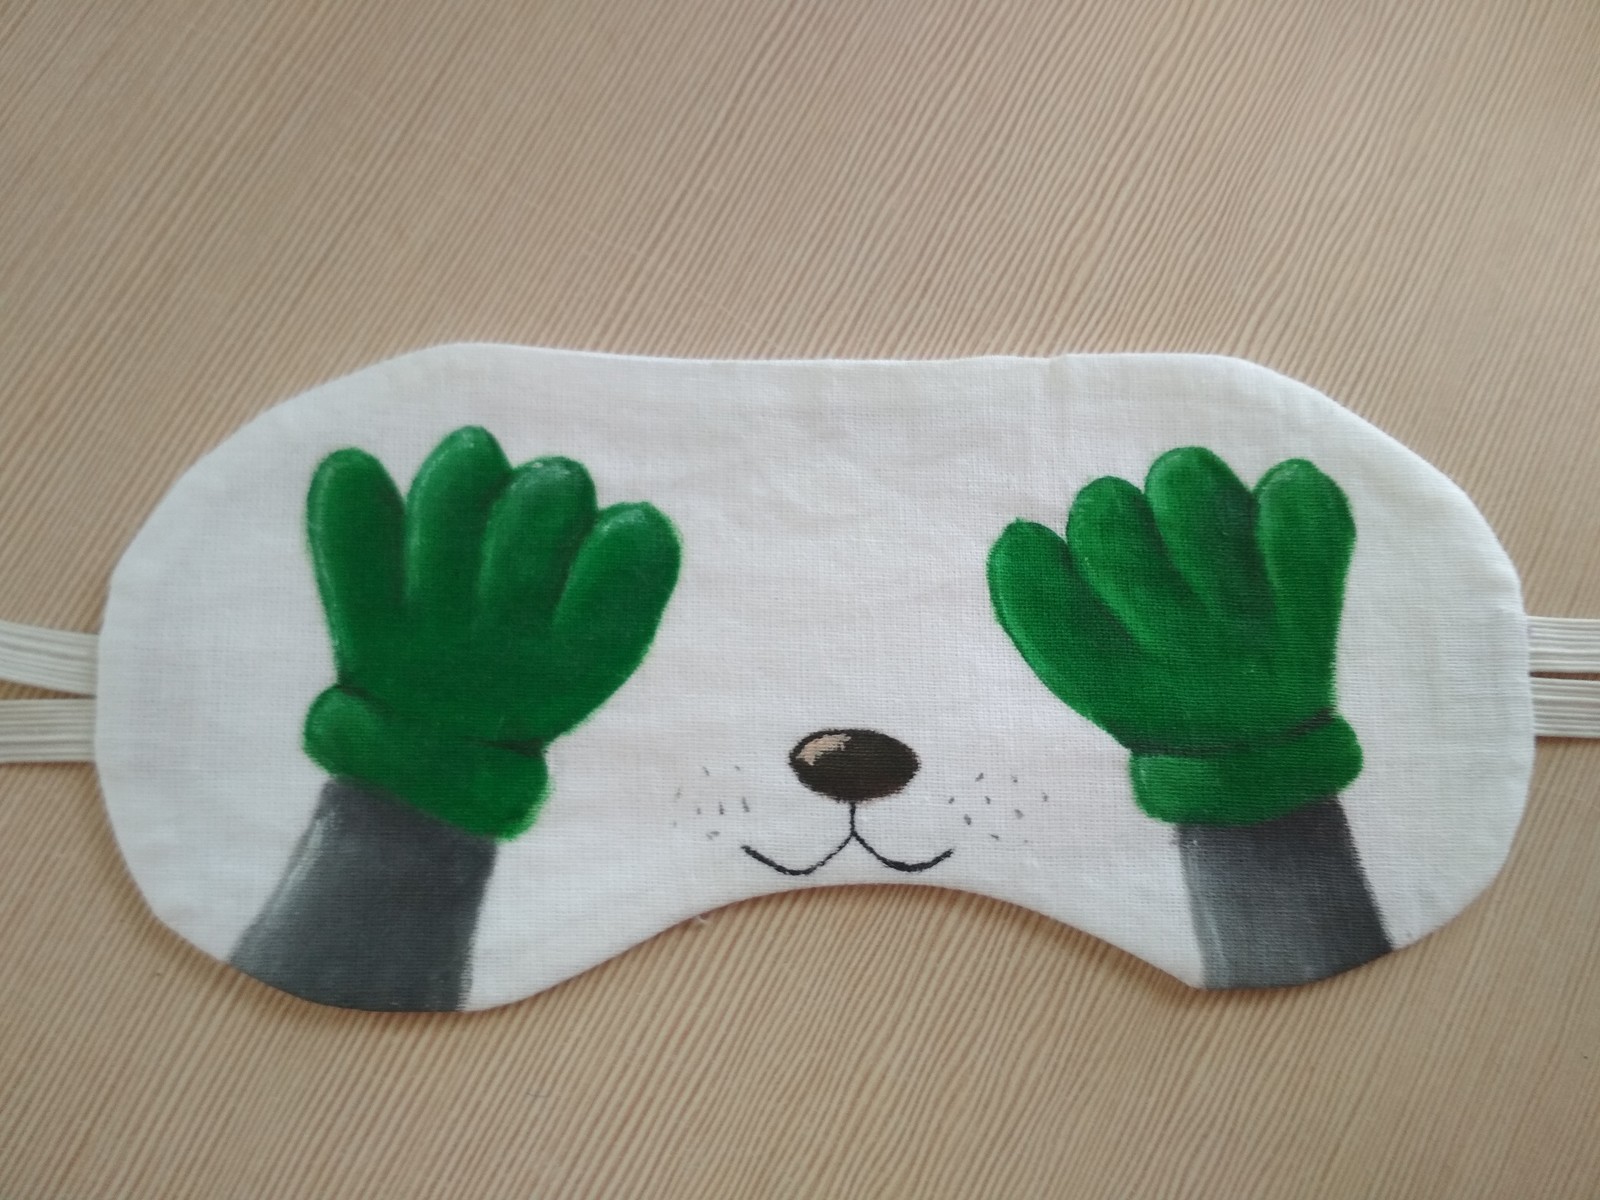 Sleep mask and fabric painting - My, With your own hands, Painting on fabric, Sleep mask